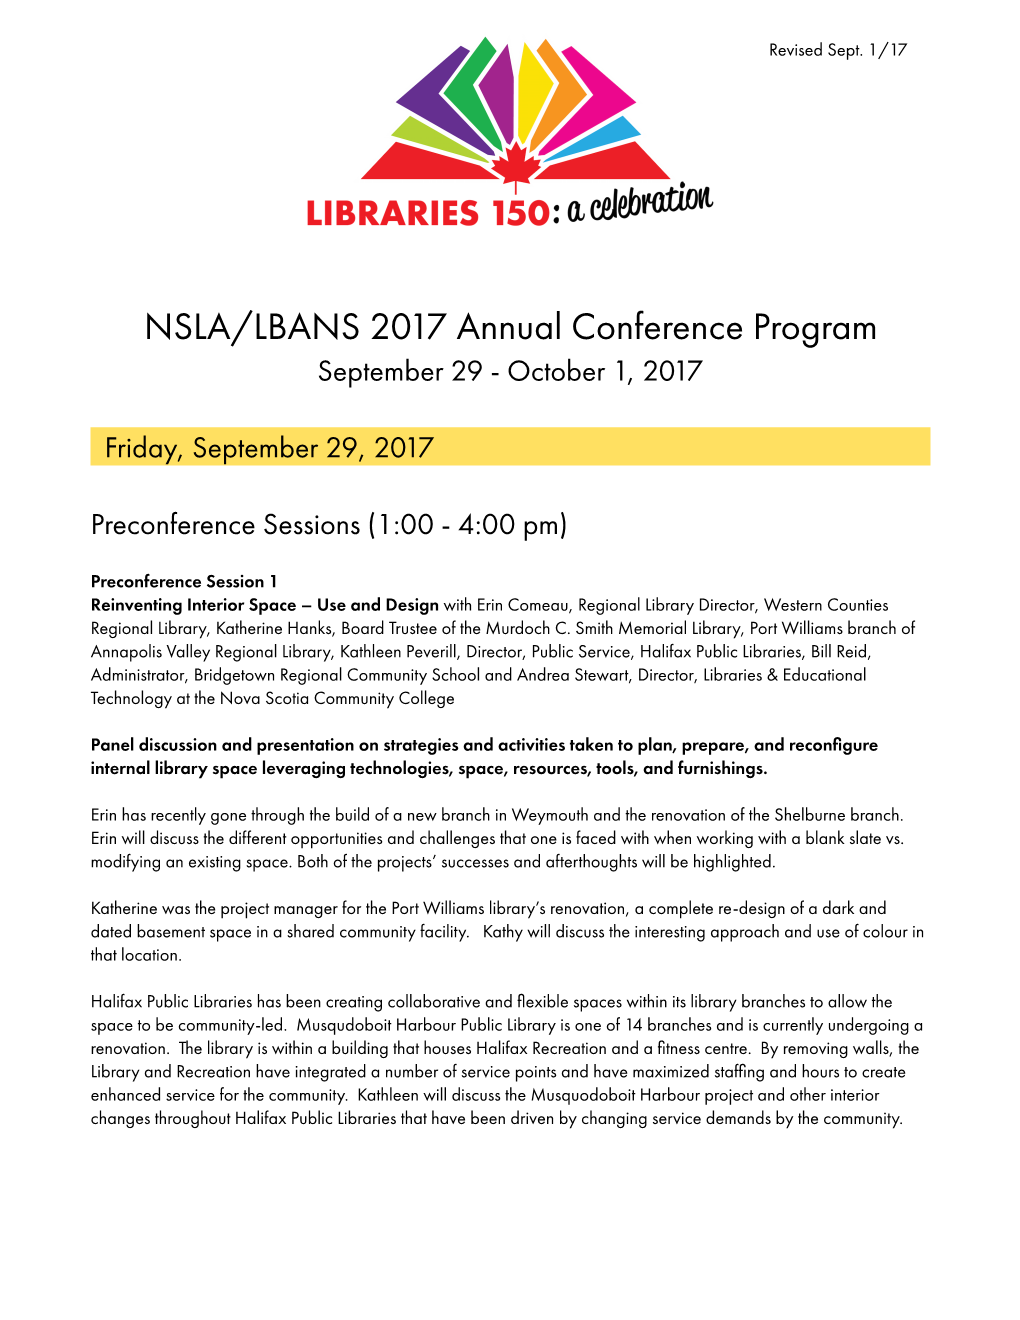 NSLA/LBANS Conference Sessions and Speakers